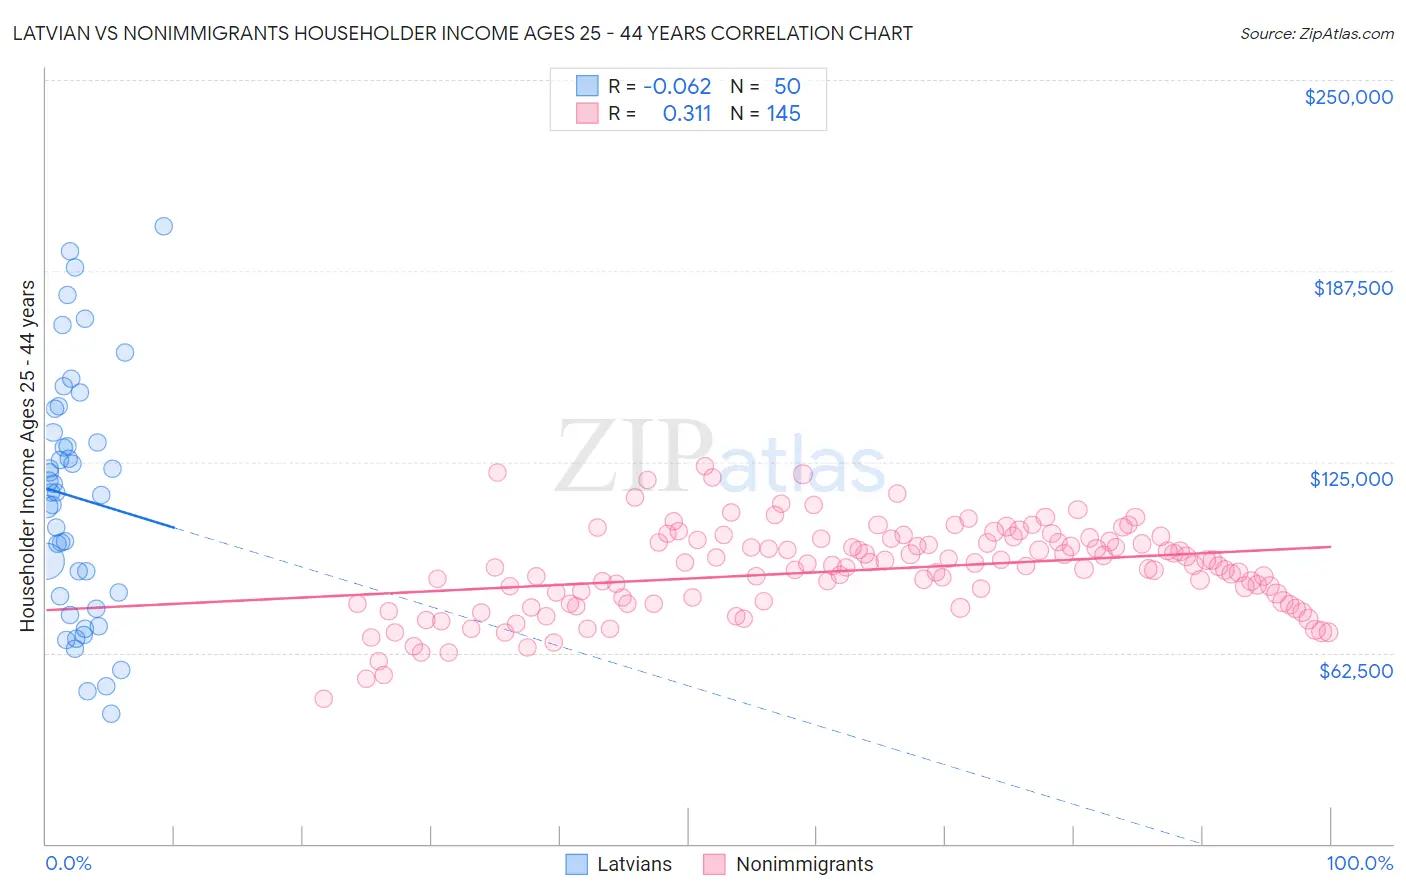 Latvian vs Nonimmigrants Householder Income Ages 25 - 44 years